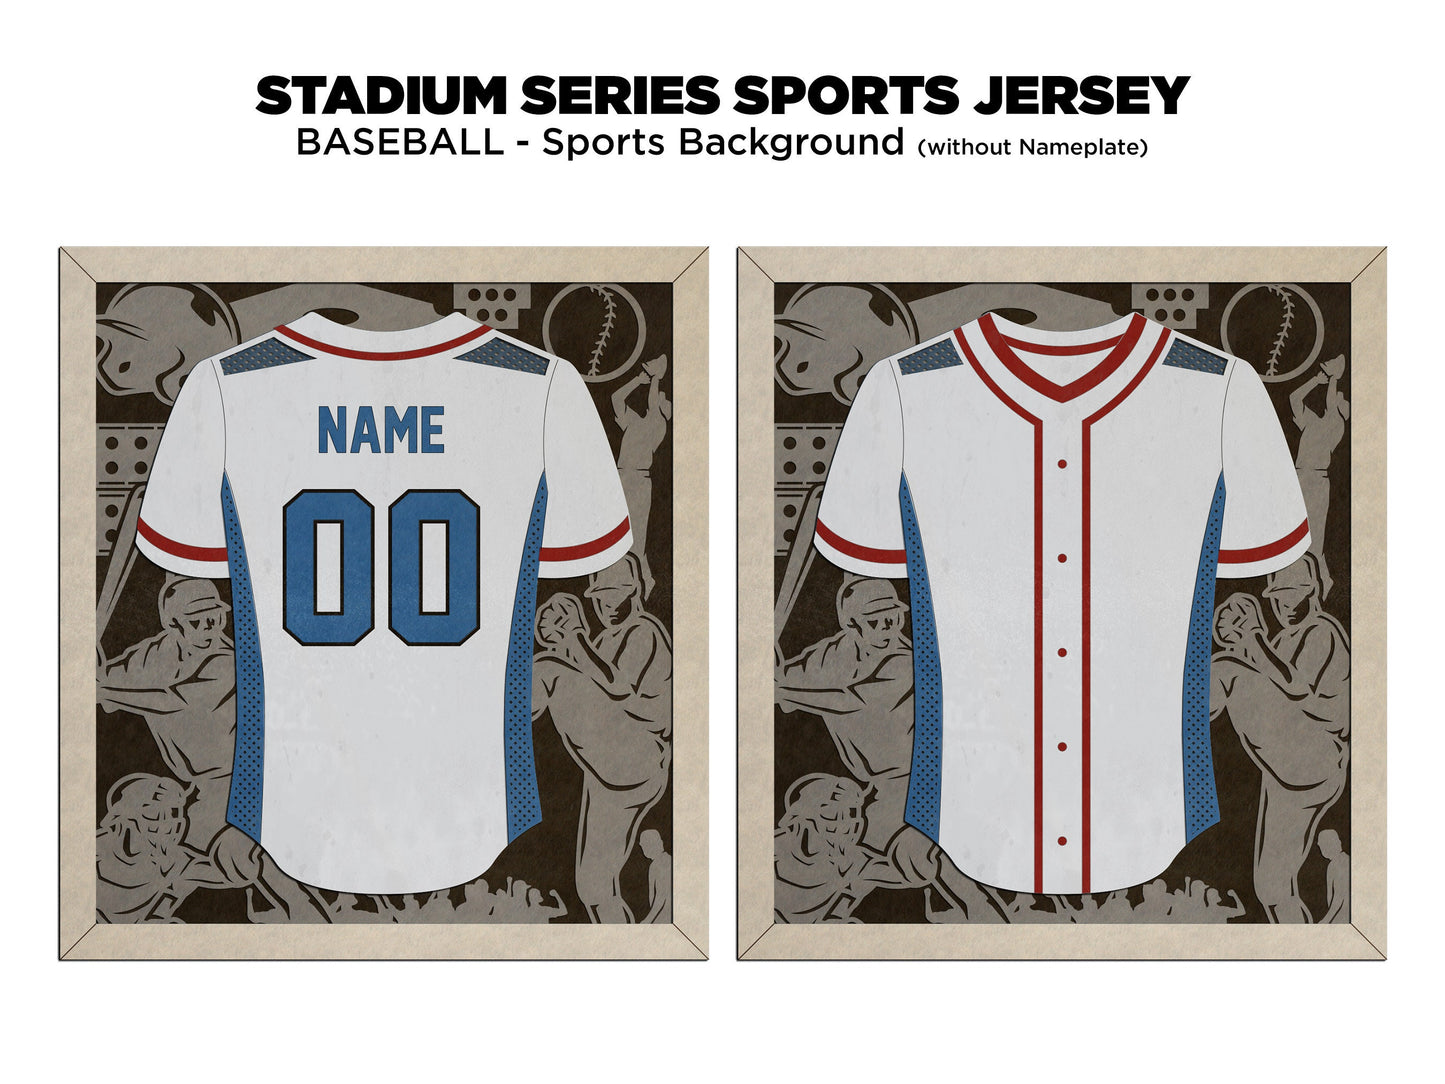 Stadium Series Jerseys - Baseball - 3 Variations - Male, Female & Alternate Backgrounds - SVG File Download - Sized for Glowforge